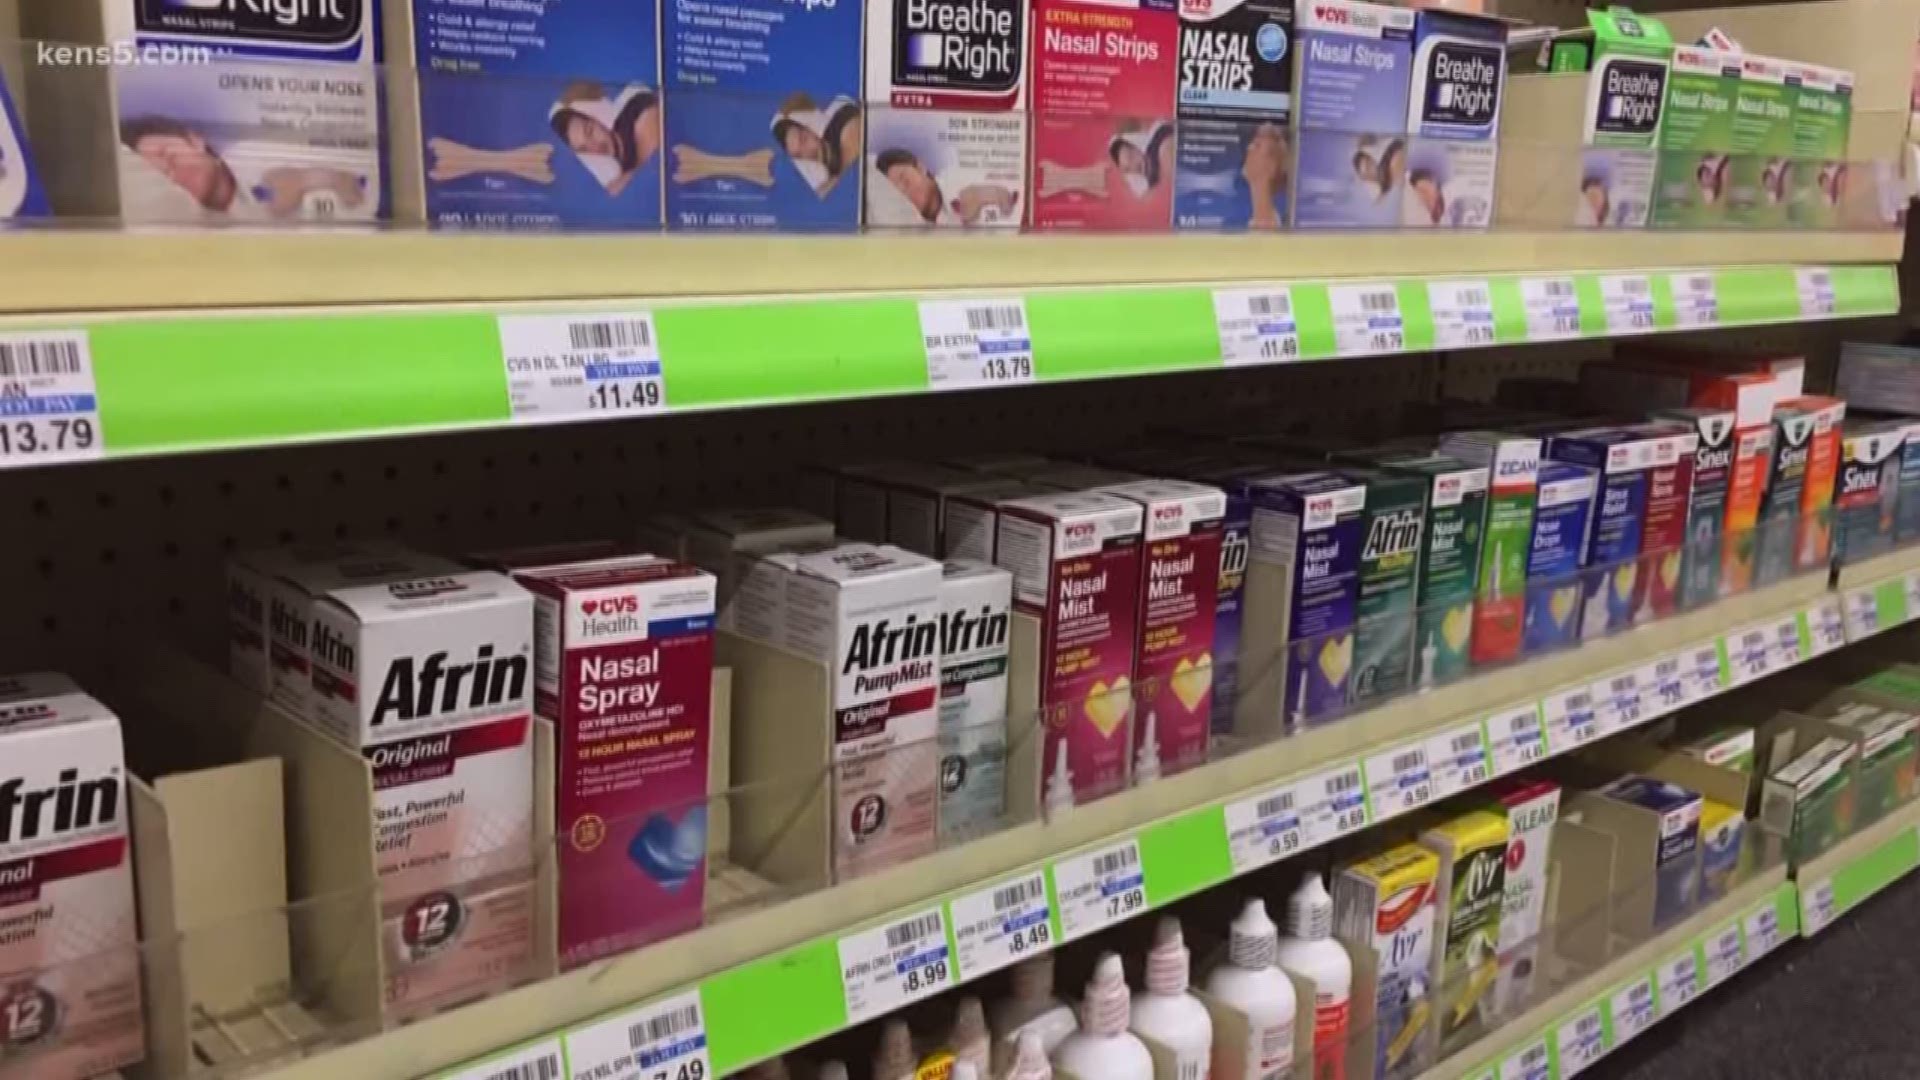 They offer instant relief from a stuffy nose but there's a risk in the bottle. Over-the-counter nasal sprays can become highly addictive if not used correctly. Monica Robins talked with two people about their struggles to stay away from the nasal spray.